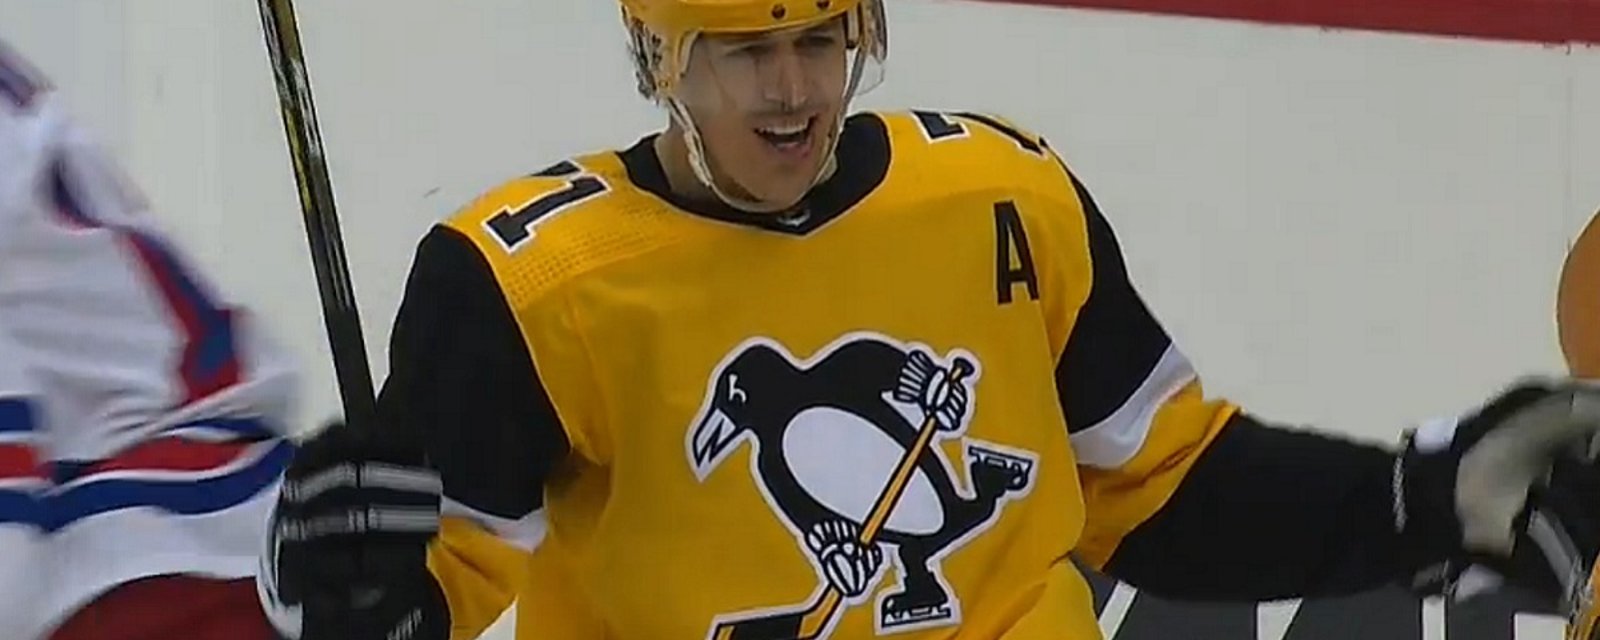 Malkin scores off insane no look spin-o-rama backhand for his 2nd of the game.